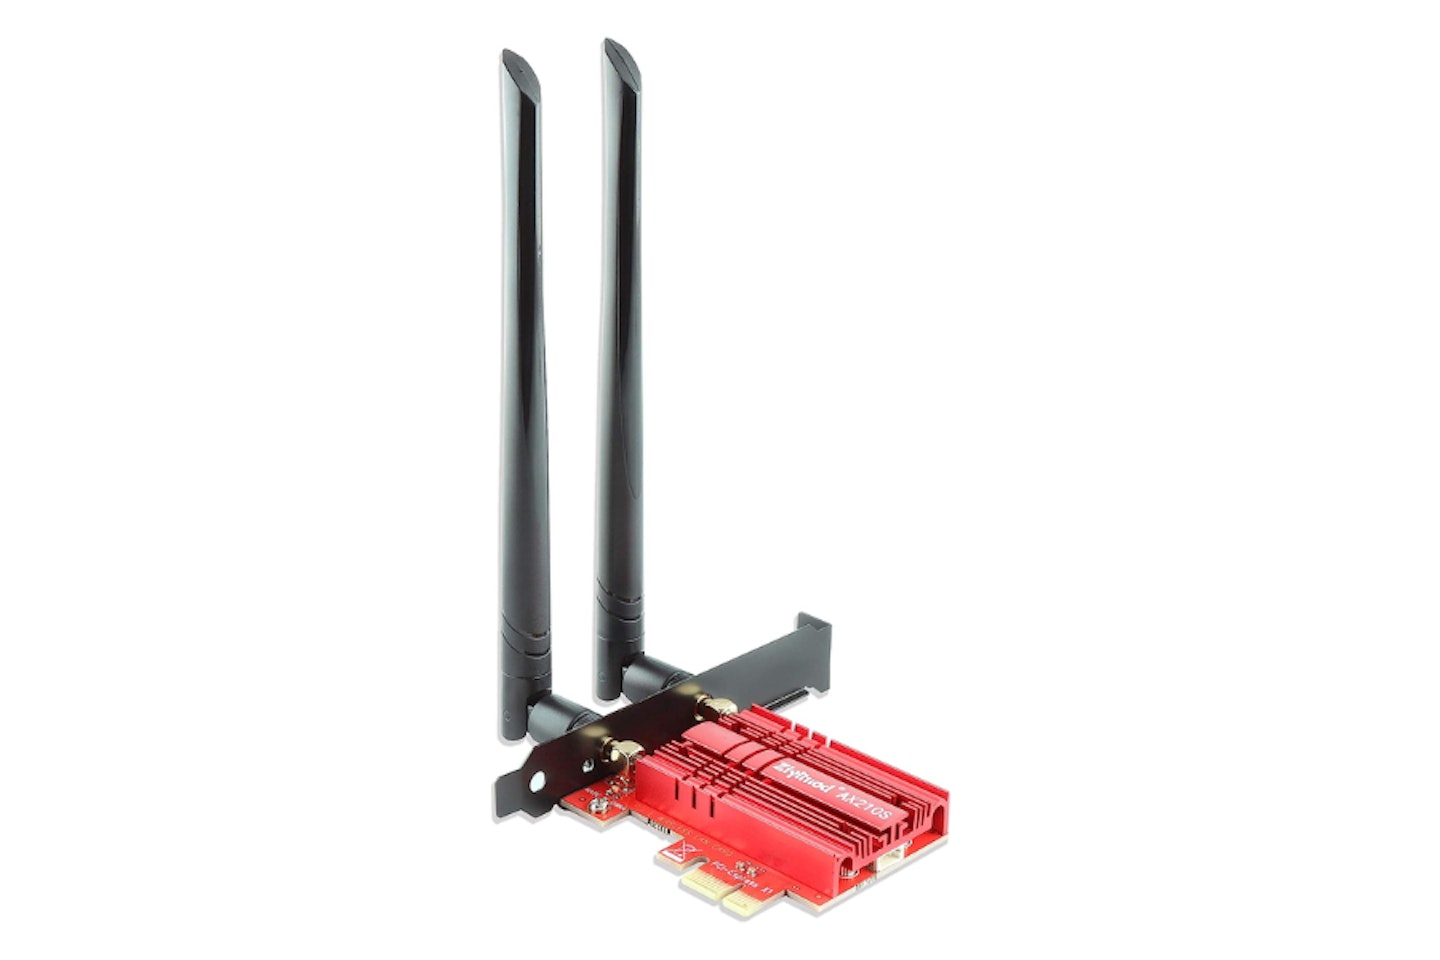 Ziyituod 5400Mbps PCIe WiFi 6E Card  - possibly the best wifi card for gaming